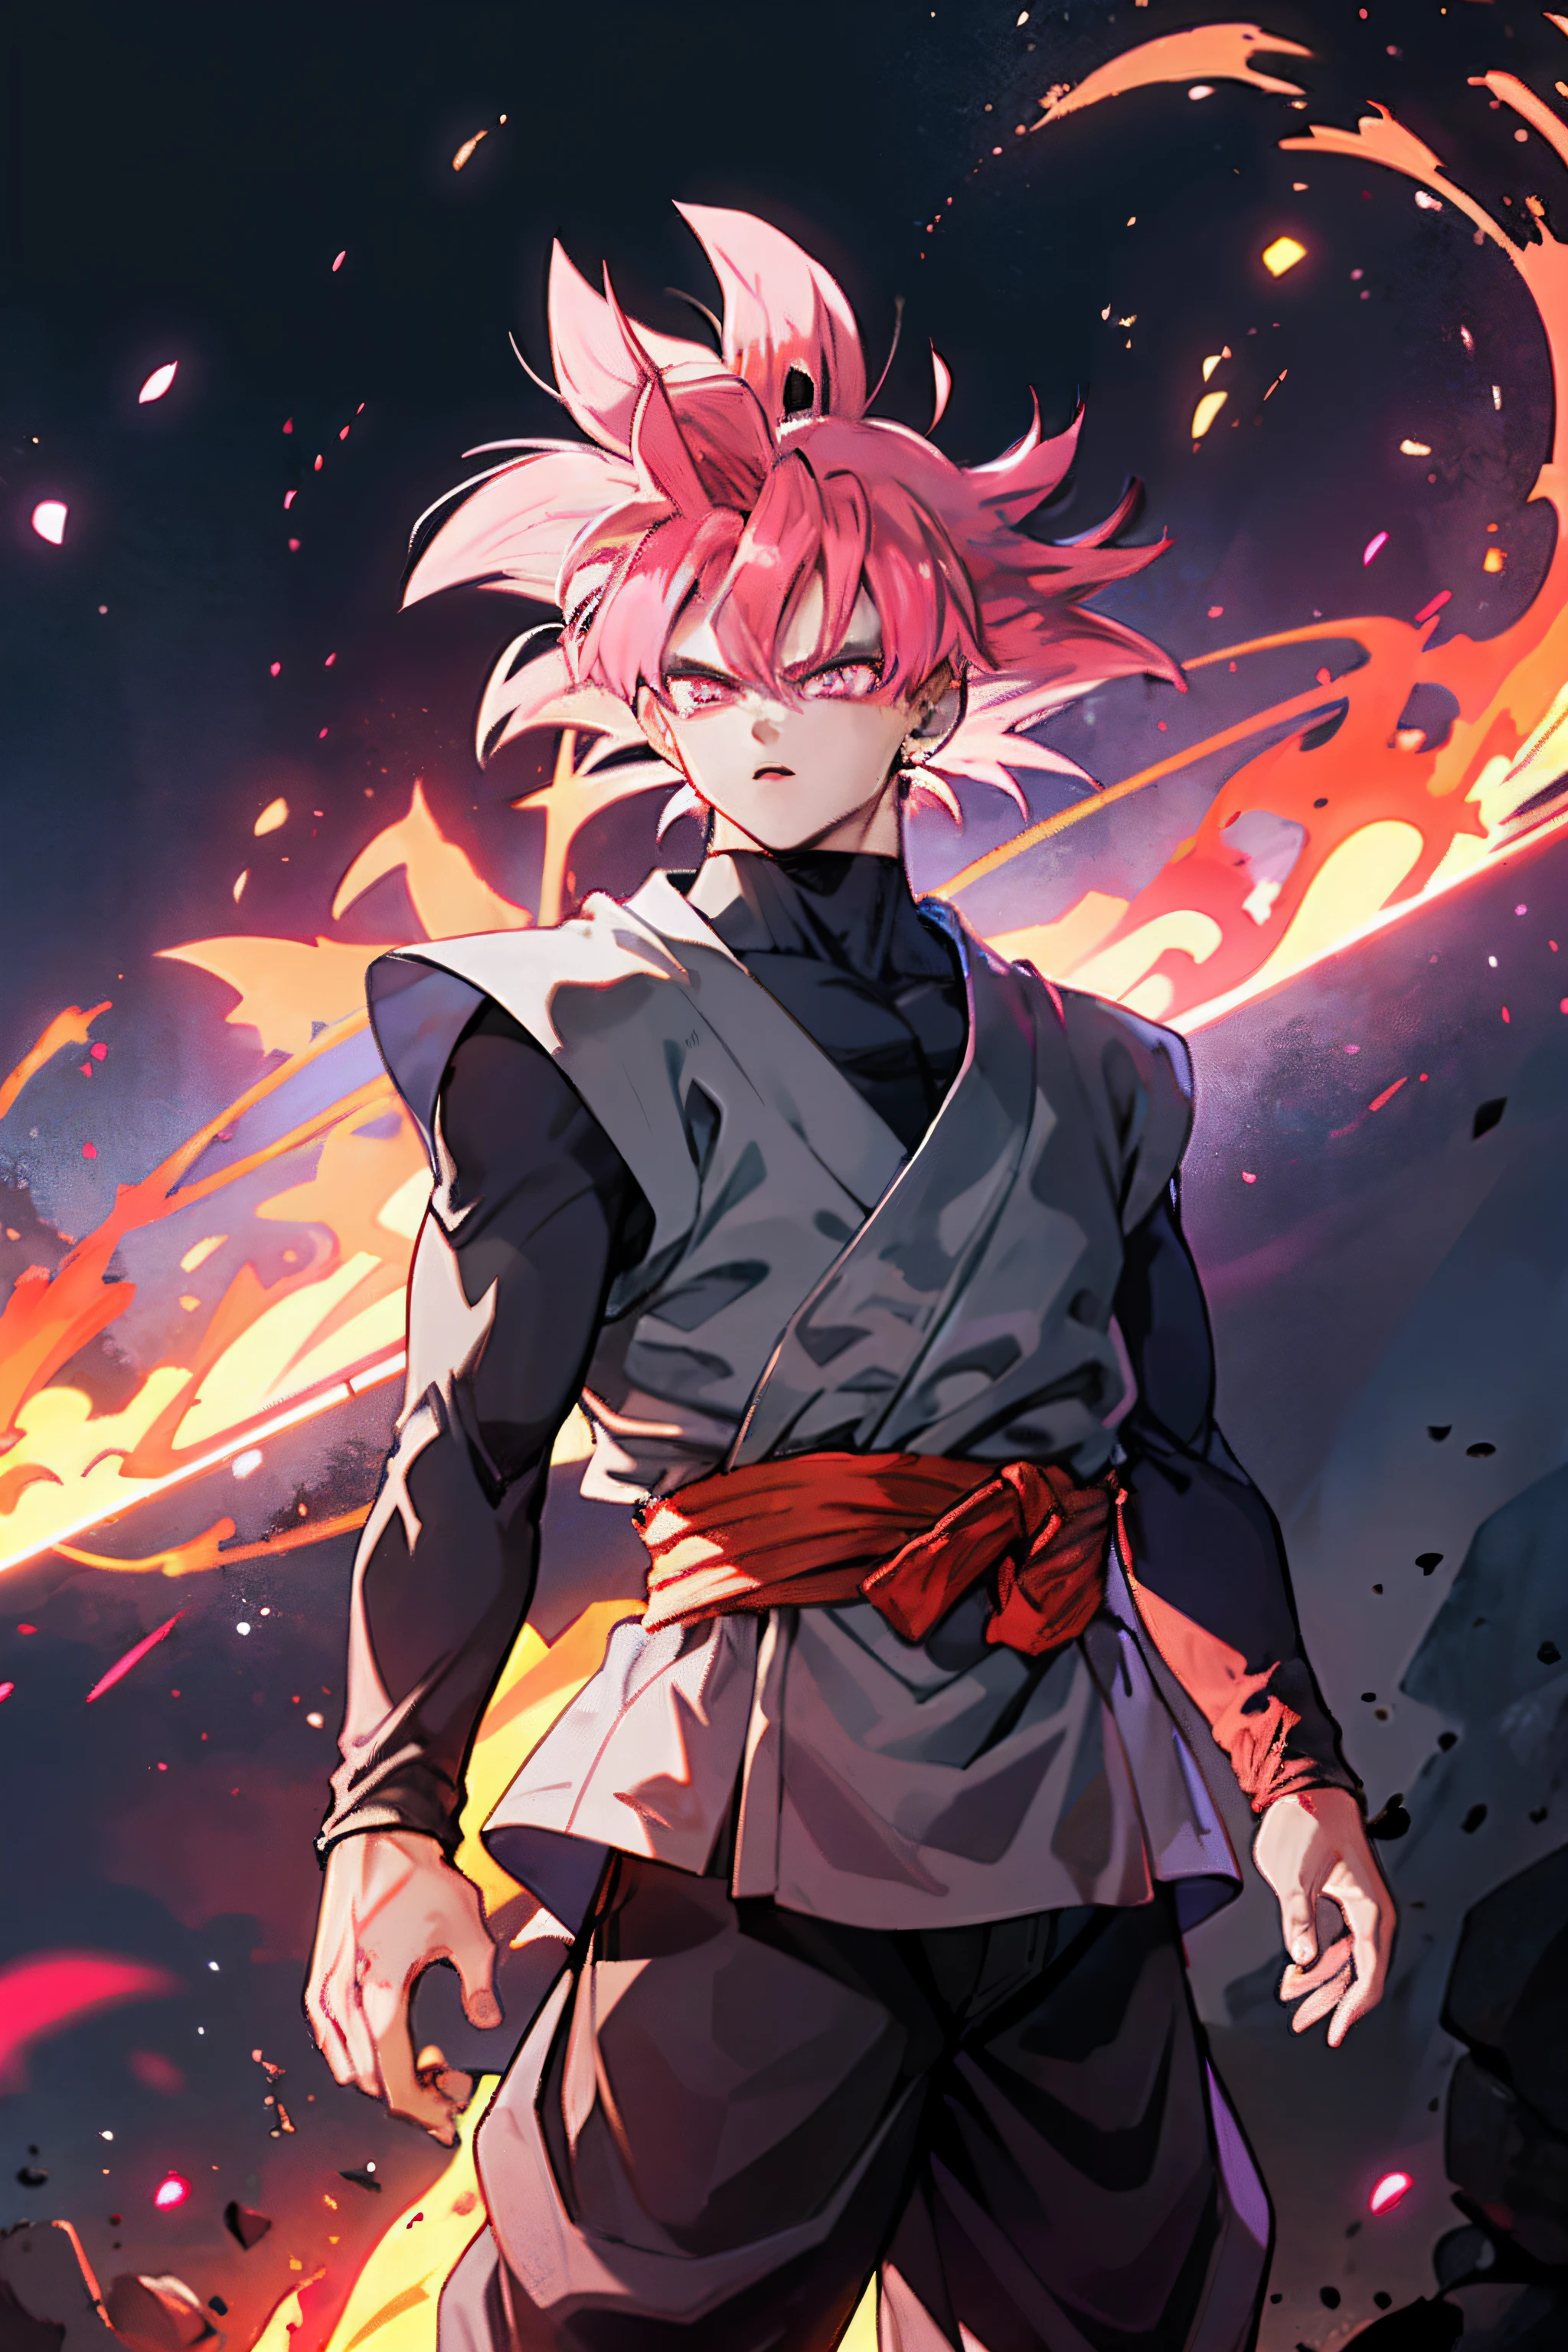 Masterpiece,goku black,morden clothes,pink hairs,pink eyes,pink aura,flame particles in air